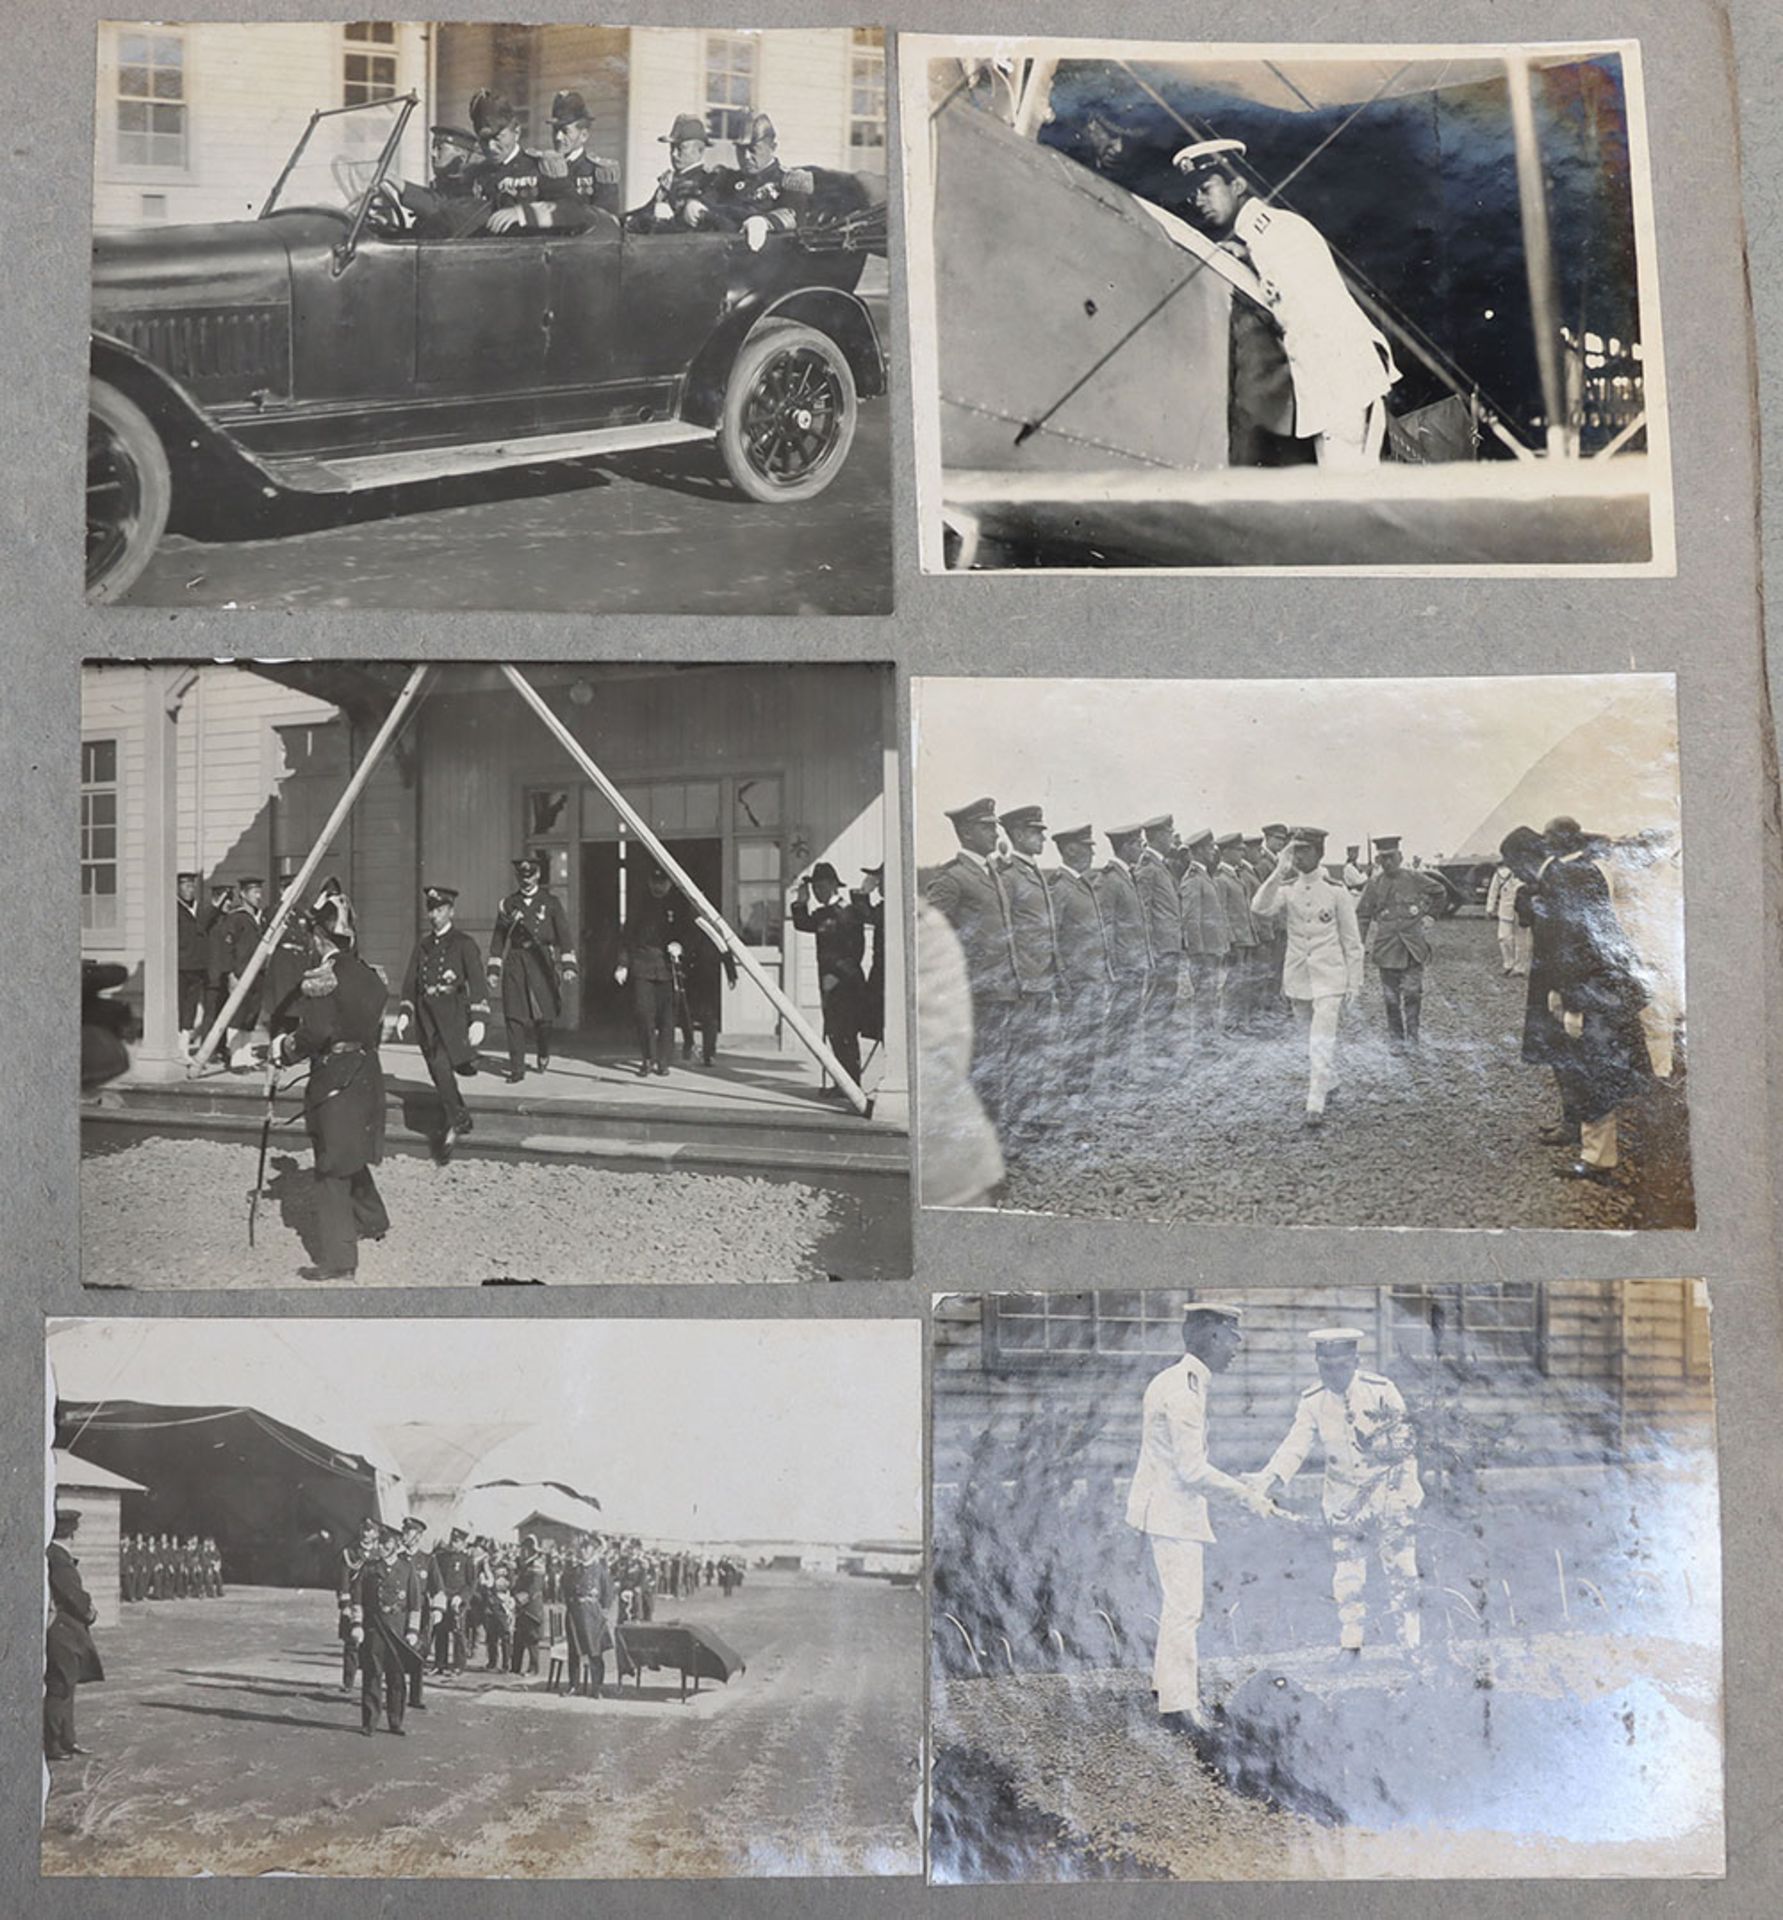 Historically Interesting Photograph Album Compiled by a Member of the Naval Aviation Station at Kasu - Image 27 of 47